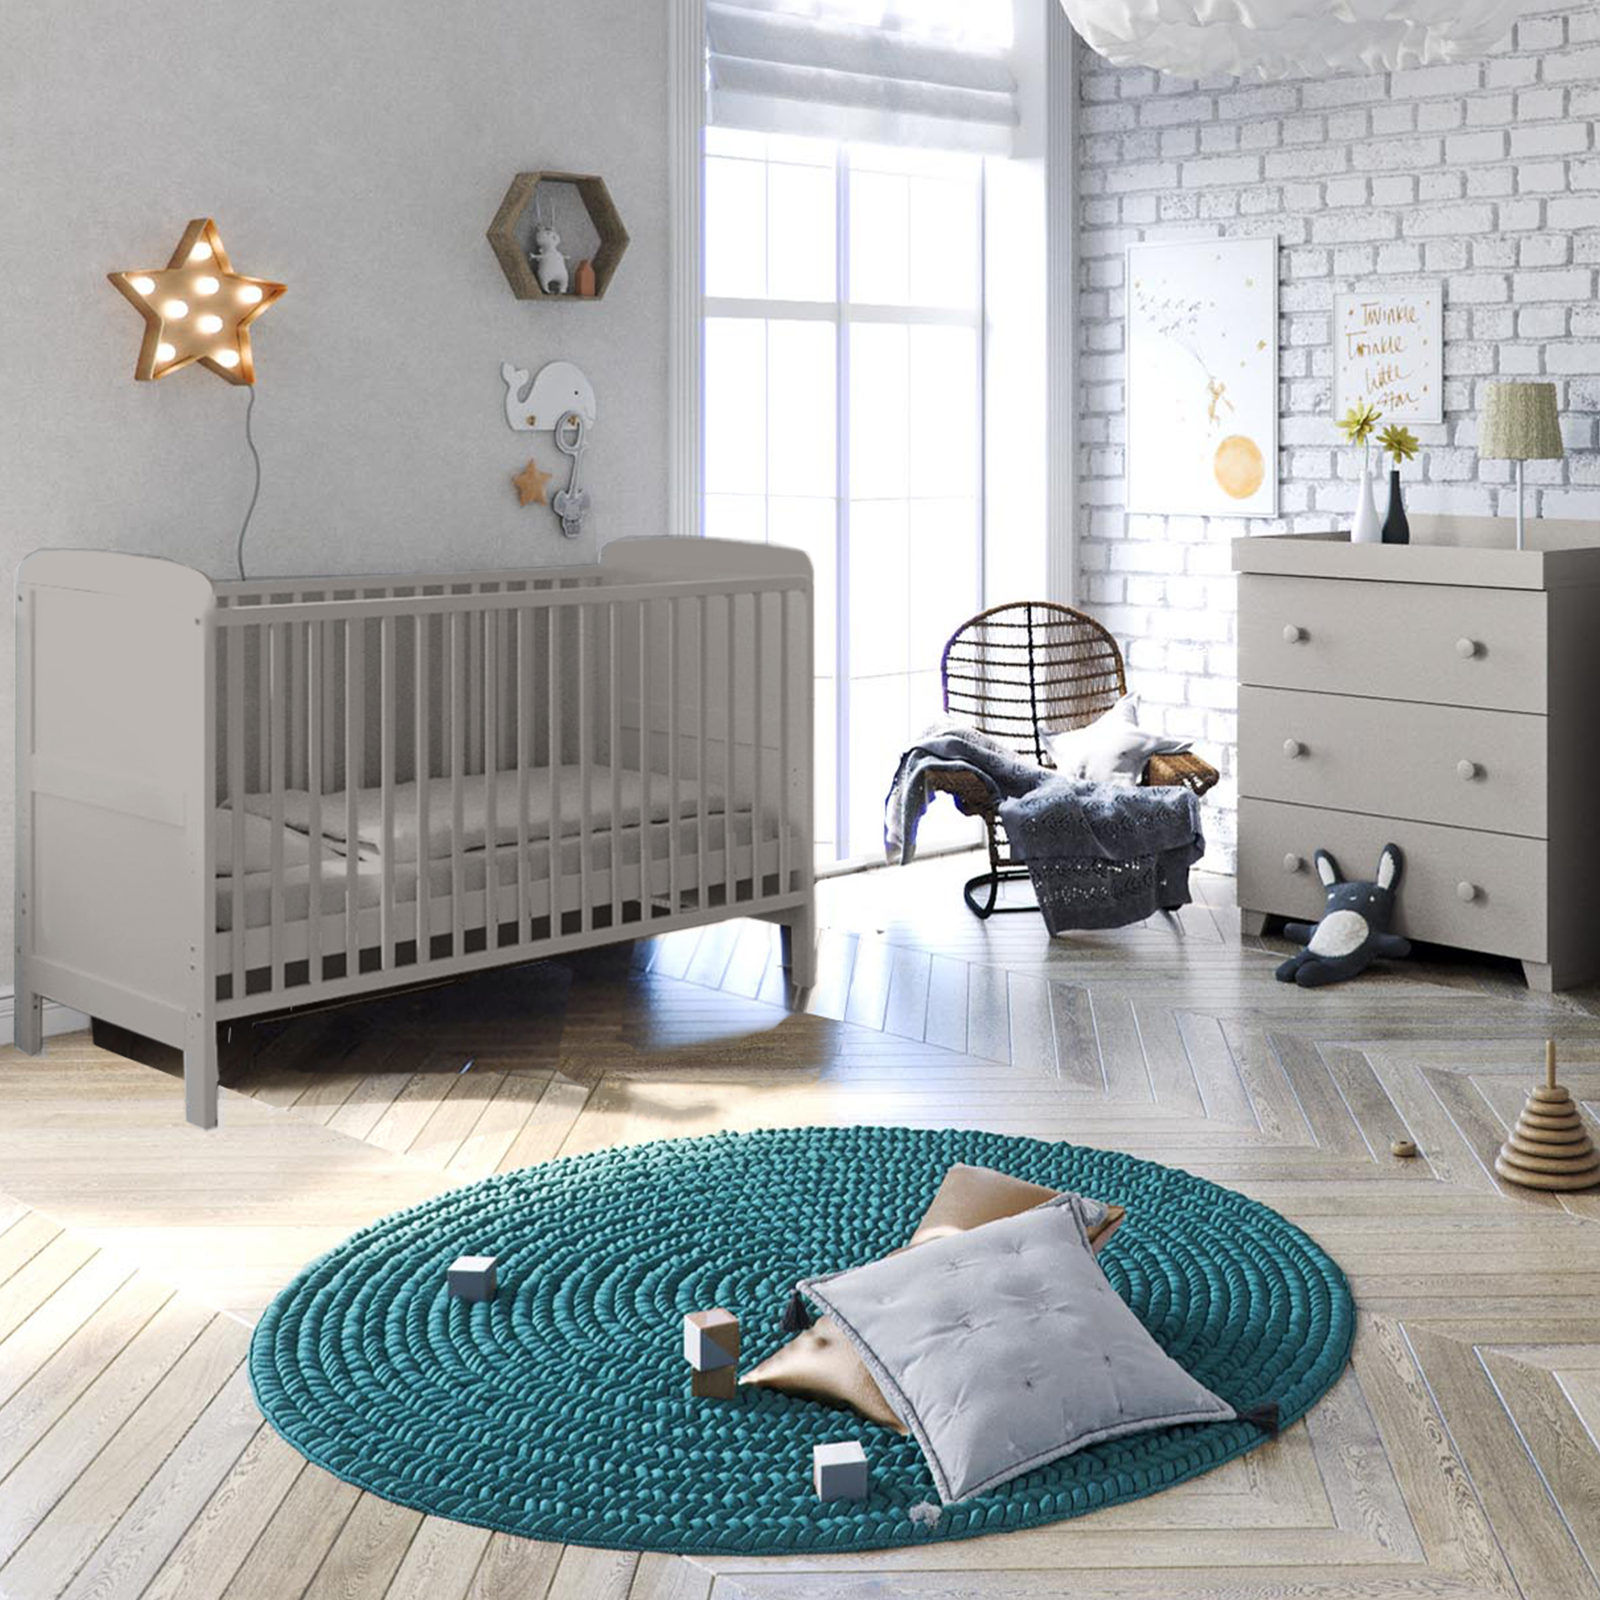 Puggle Henbury Cot Bed 4 Piece Nursery Furniture Set With Deluxe Eco Fibre Mattress  - Classic Grey